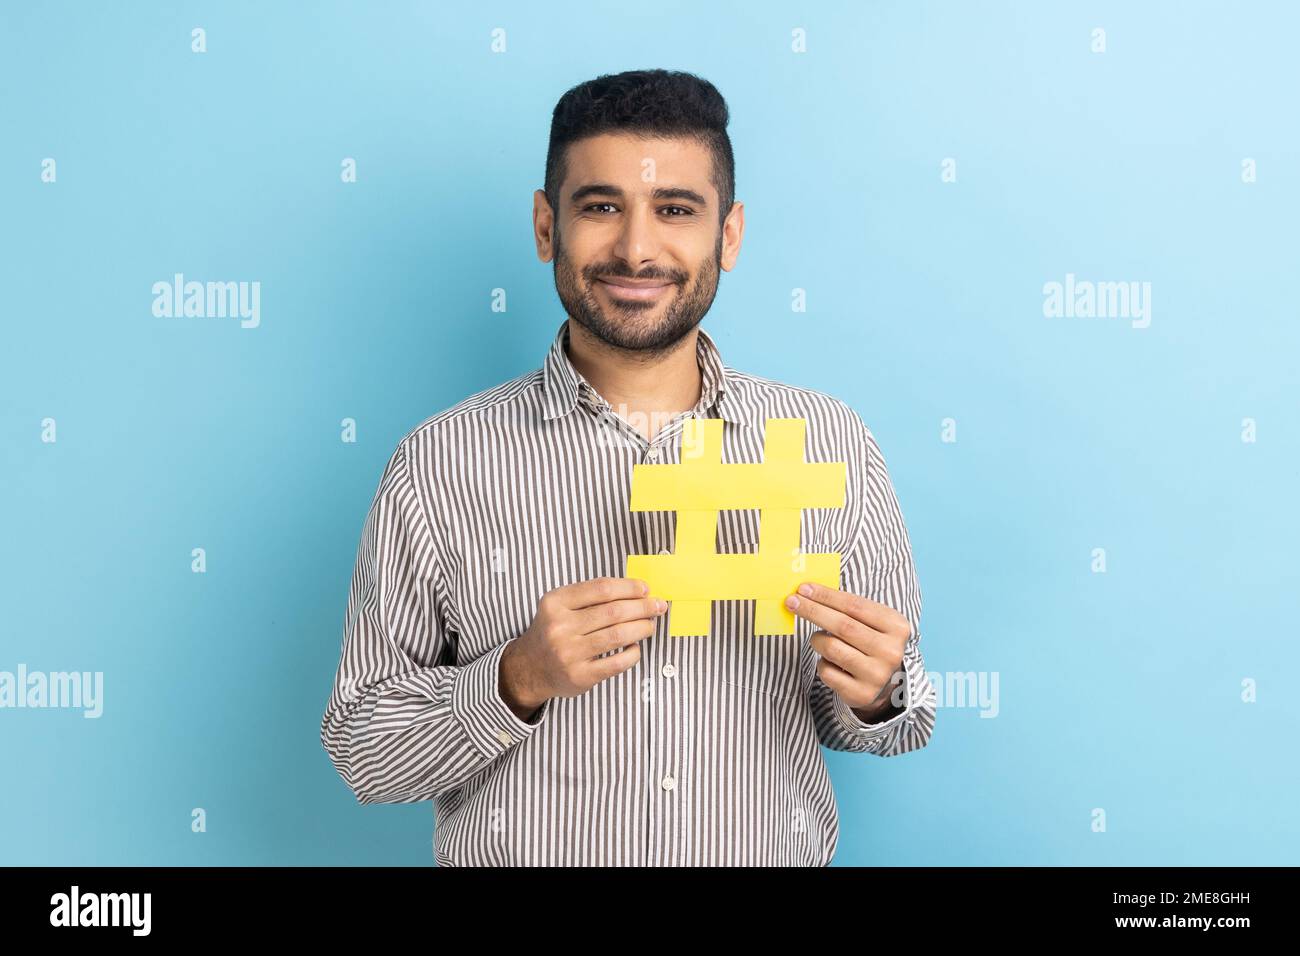 Viral hashtag and successful blogging. Satisfied businessman with beard holding large yellow hash symbol, wearing striped shirt. Indoor studio shot isolated on blue background. Stock Photo